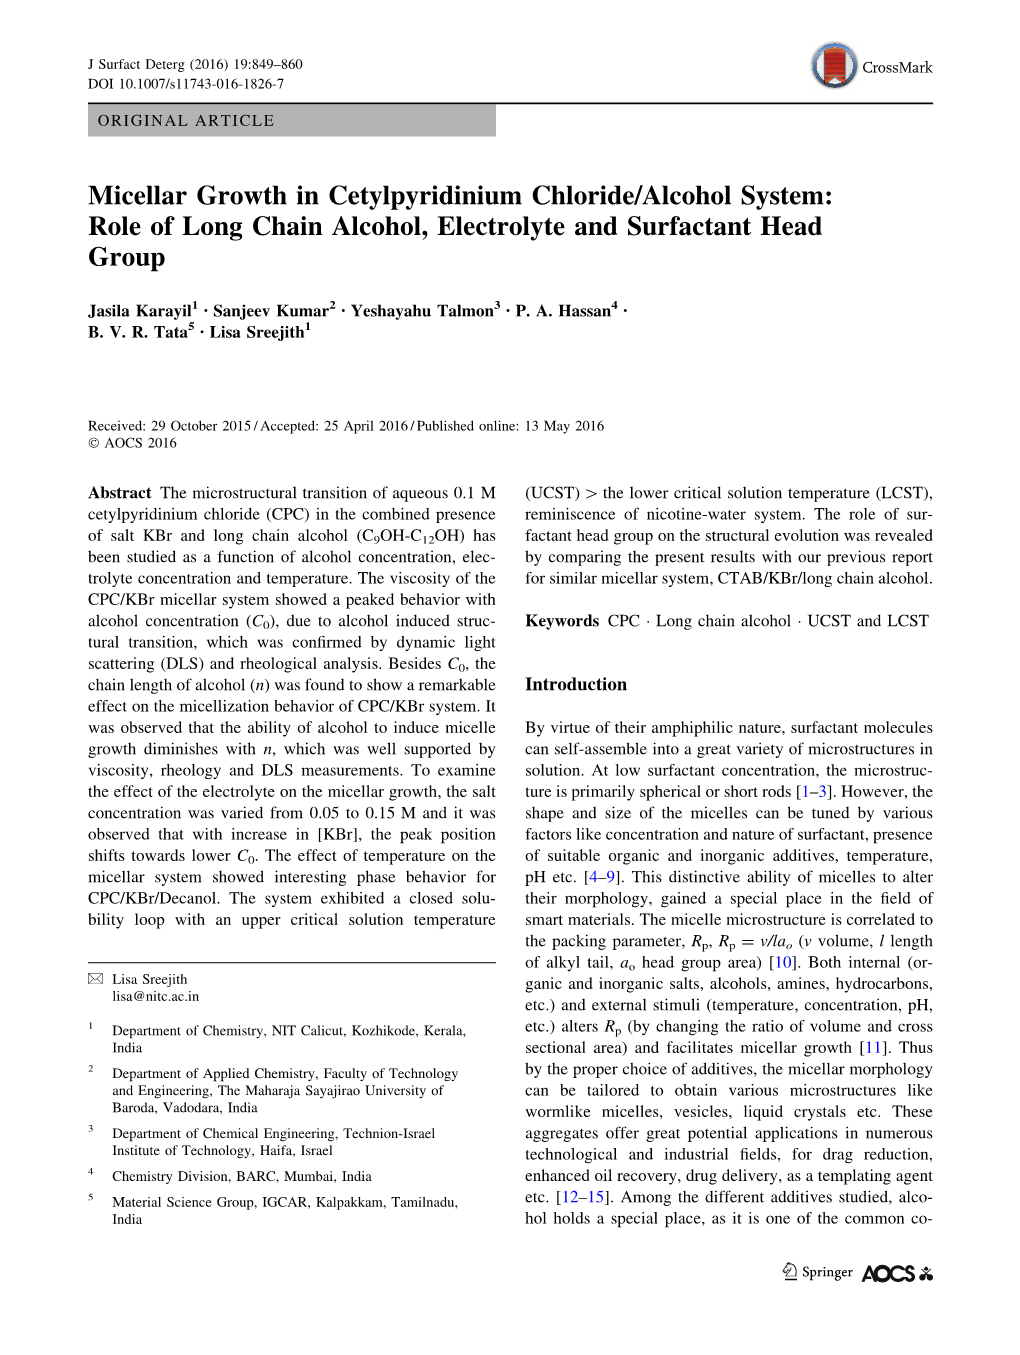 Micellar Growth in Cetylpyridinium Chloride/Alcohol System: Role of Long Chain Alcohol, Electrolyte and Surfactant Head Group